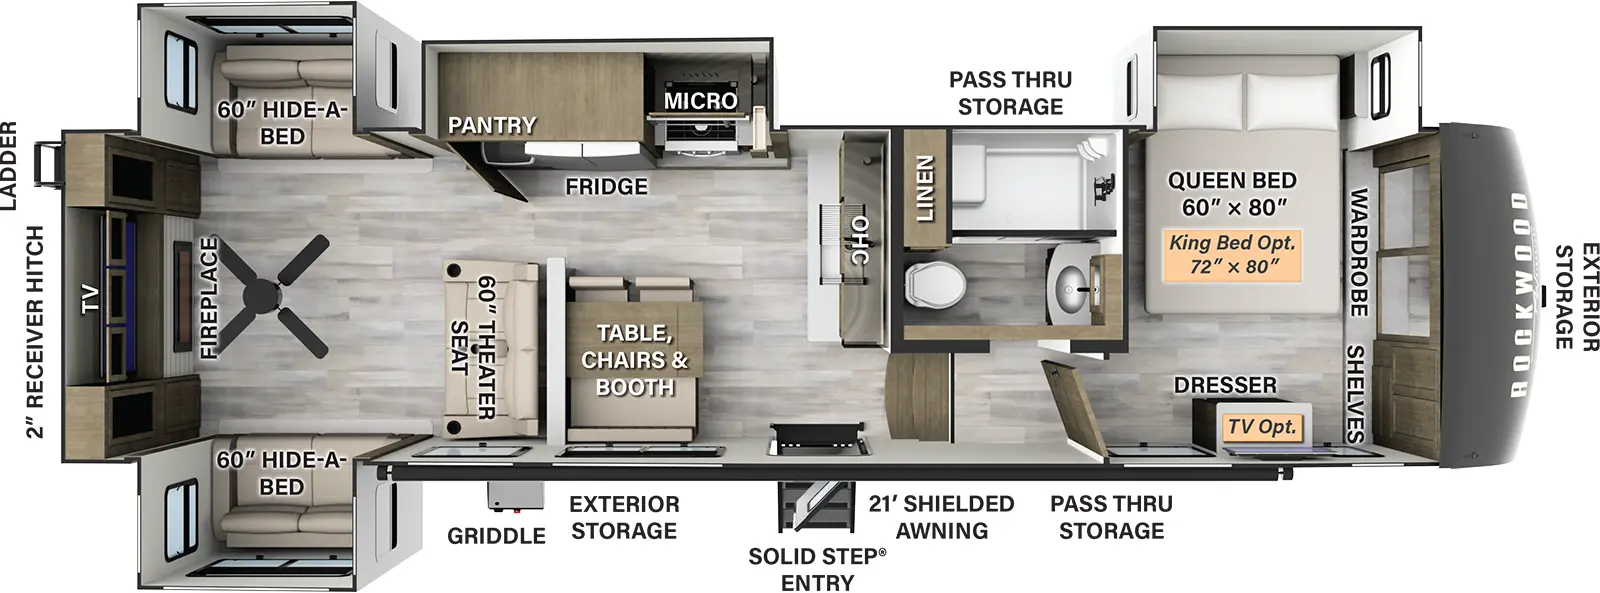 The 375RL has four slides and one entry door. Exterior features a 21 foot shielded awning, solid step entry, pass through storage, exterior storage, griddle, rear ladder, and 2 inch receiver hitch. Interior layout front to back: Queen bed off door side slideout, front wardrobe and shelves, and dresser (optional TV and king bed); side aisle full bathroom with linen closet; steps down to main living area; kitchen counter with sink and overhead cabinet along inner wall; off door side slideout with microwave, cooktop, refrigerator and pantry; door side table, chairs & booth; rear living room with paddle fan, theater seating, opposing hide a bed sofa slideouts, and rear entertainment center with TV and fireplace. 